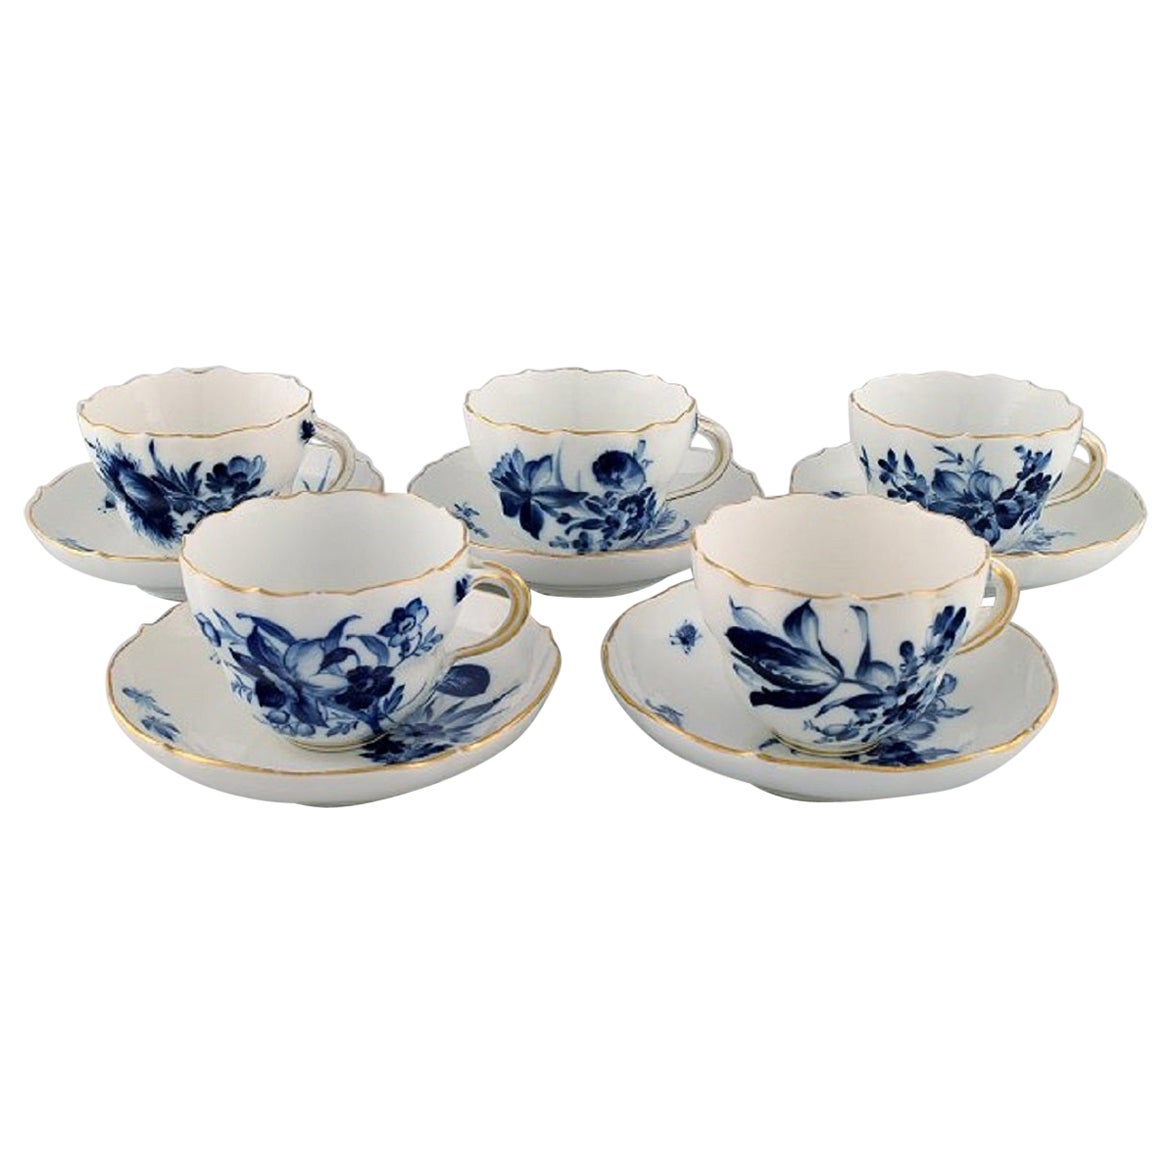 Five Antique Meissen Coffee Cups with Saucers in Porcelain, Early 20th C